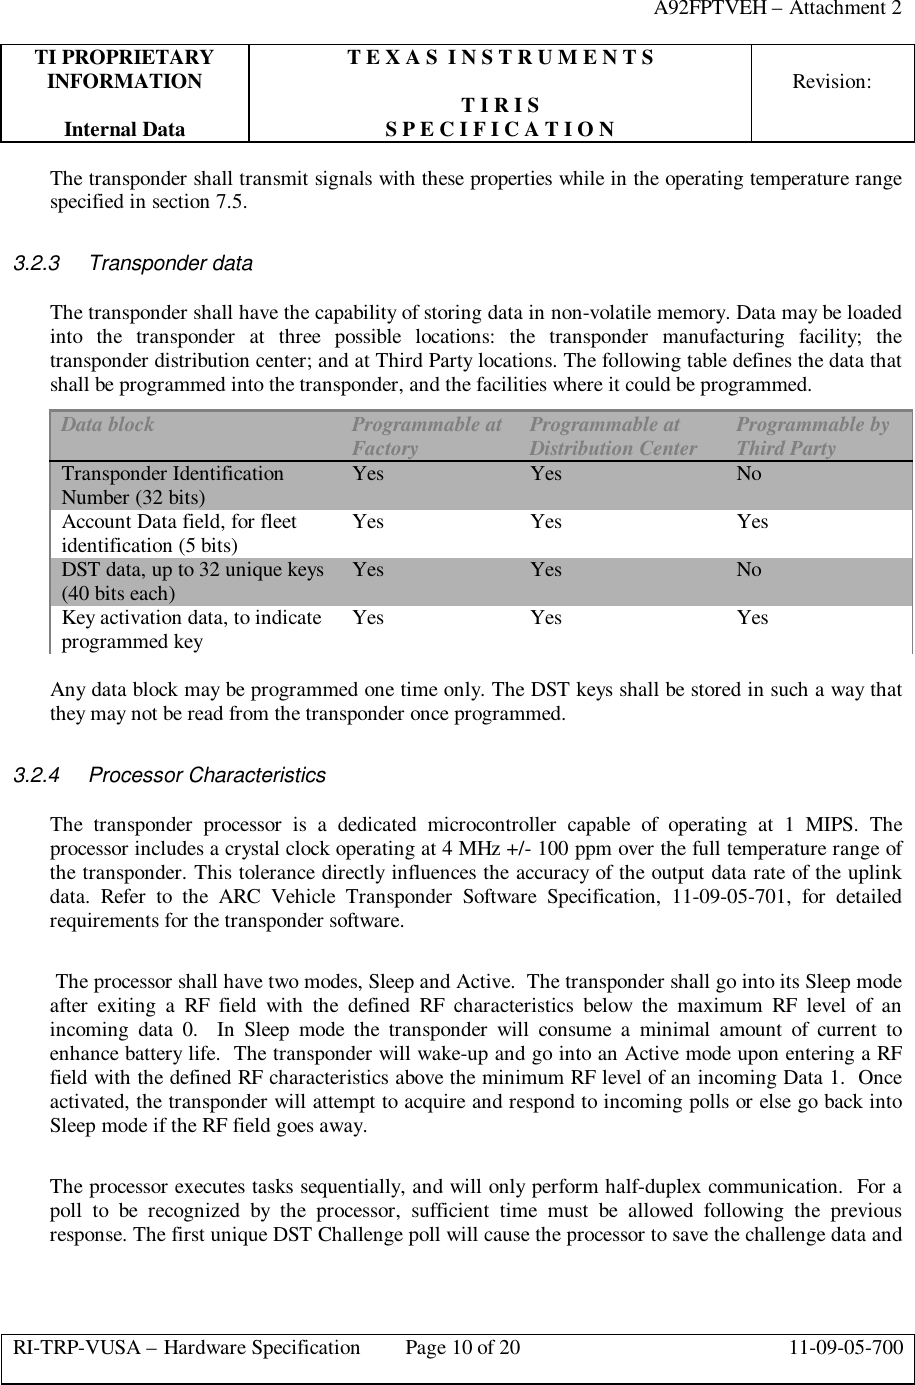 A92FPTVEH – Attachment 2TI PROPRIETARY T E X A S  I N S T R U M E N T SINFORMATION Revision:T I R I SInternal Data S P E C I F I C A T I O NRI-TRP-VUSA – Hardware Specification Page 10 of 20 11-09-05-700The transponder shall transmit signals with these properties while in the operating temperature rangespecified in section 7.5.3.2.3 Transponder dataThe transponder shall have the capability of storing data in non-volatile memory. Data may be loadedinto the transponder at three possible locations: the transponder manufacturing facility; thetransponder distribution center; and at Third Party locations. The following table defines the data thatshall be programmed into the transponder, and the facilities where it could be programmed.Data block Programmable atFactory Programmable atDistribution Center Programmable byThird PartyTransponder IdentificationNumber (32 bits) Yes Yes NoAccount Data field, for fleetidentification (5 bits) Yes Yes YesDST data, up to 32 unique keys(40 bits each) Yes Yes NoKey activation data, to indicateprogrammed key Yes Yes YesAny data block may be programmed one time only. The DST keys shall be stored in such a way thatthey may not be read from the transponder once programmed.3.2.4 Processor CharacteristicsThe transponder processor is a dedicated microcontroller capable of operating at 1 MIPS. Theprocessor includes a crystal clock operating at 4 MHz +/- 100 ppm over the full temperature range ofthe transponder. This tolerance directly influences the accuracy of the output data rate of the uplinkdata. Refer to the ARC Vehicle Transponder Software Specification, 11-09-05-701, for detailedrequirements for the transponder software. The processor shall have two modes, Sleep and Active.  The transponder shall go into its Sleep modeafter exiting a RF field with the defined RF characteristics below the maximum RF level of anincoming data 0.  In Sleep mode the transponder will consume a minimal amount of current toenhance battery life.  The transponder will wake-up and go into an Active mode upon entering a RFfield with the defined RF characteristics above the minimum RF level of an incoming Data 1.  Onceactivated, the transponder will attempt to acquire and respond to incoming polls or else go back intoSleep mode if the RF field goes away.The processor executes tasks sequentially, and will only perform half-duplex communication.  For apoll to be recognized by the processor, sufficient time must be allowed following the previousresponse. The first unique DST Challenge poll will cause the processor to save the challenge data and